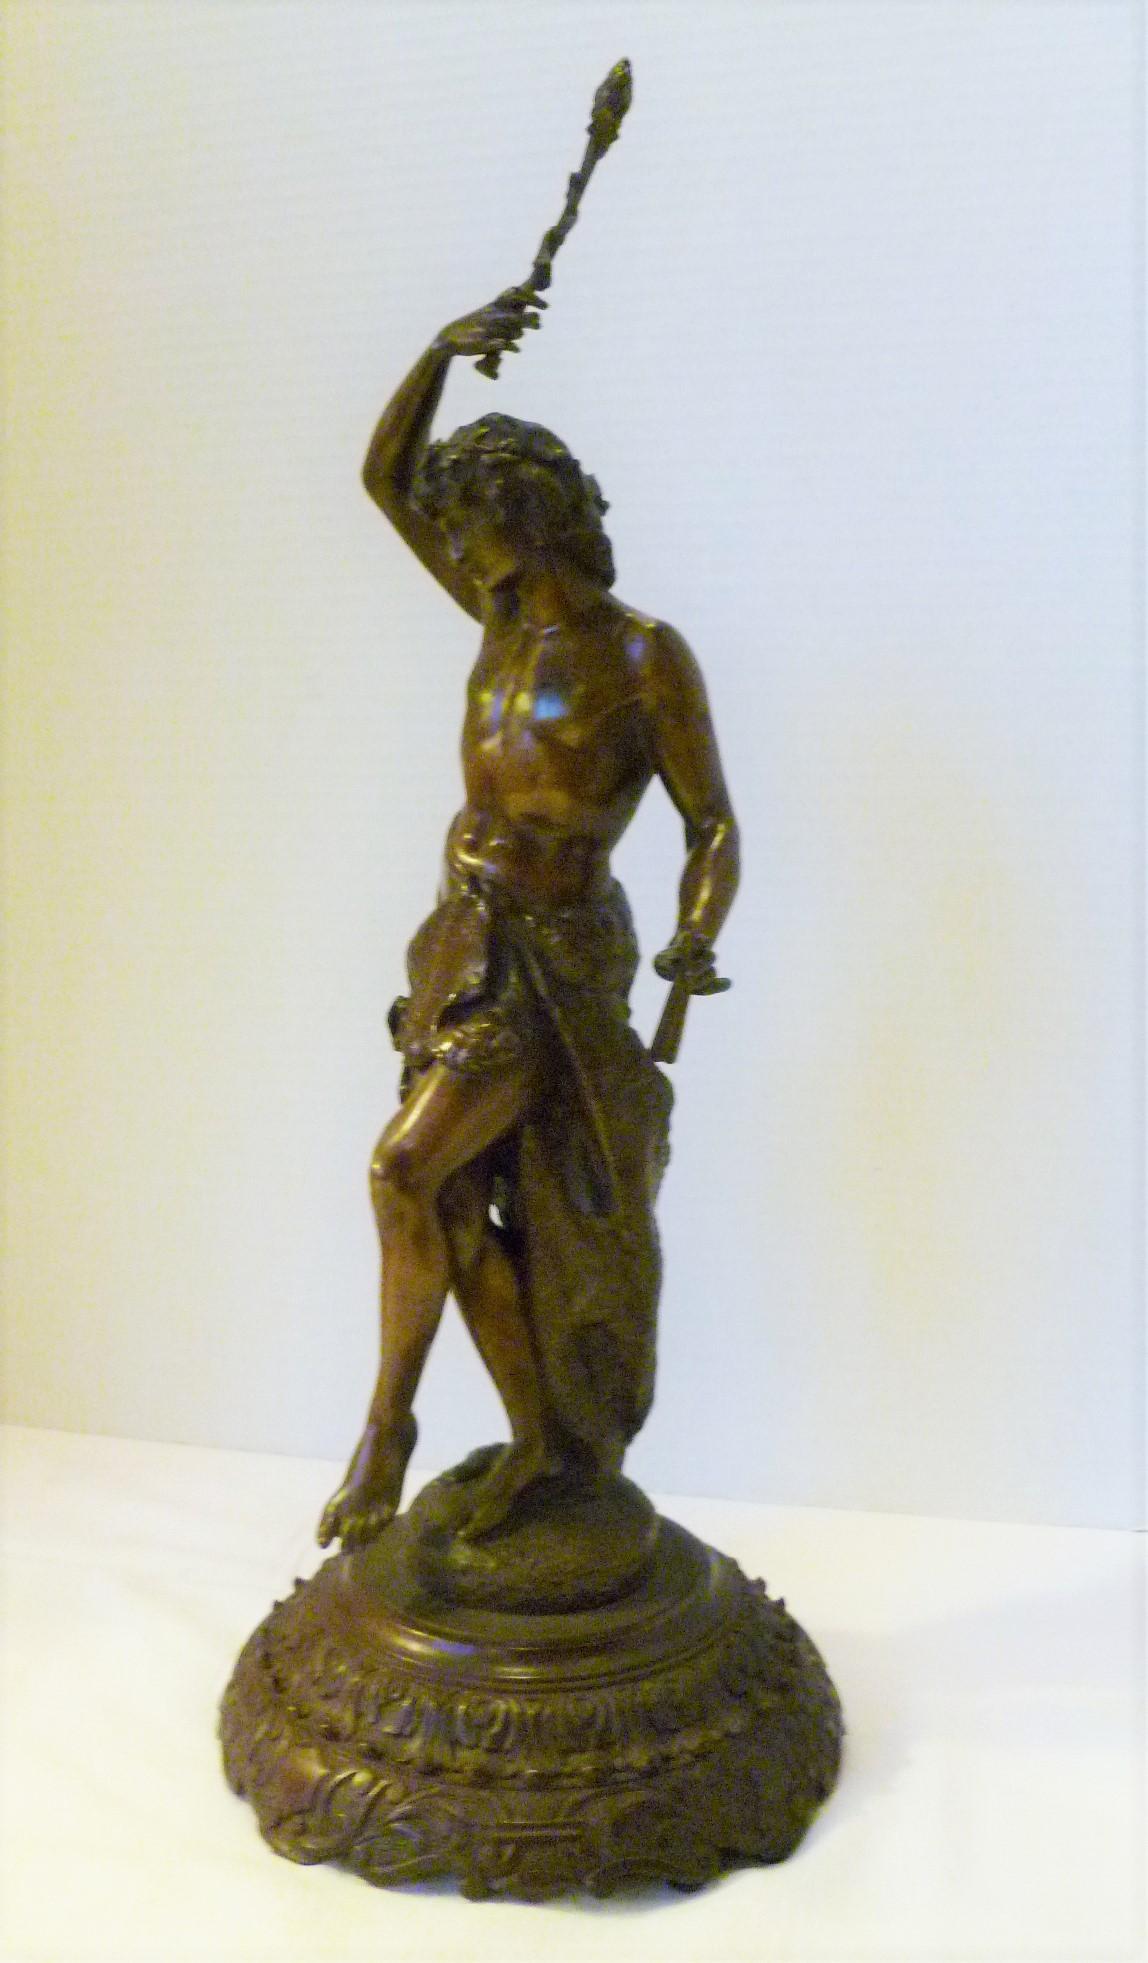 Extremely detailed and finely chased 19th century bronze figure of pan in celebration or dance perhaps in Bacchanalia. Flutes, laurel scepter raised, lion skin cloak, floral head garland and exquisite detail highlight this statue. Intricate carved